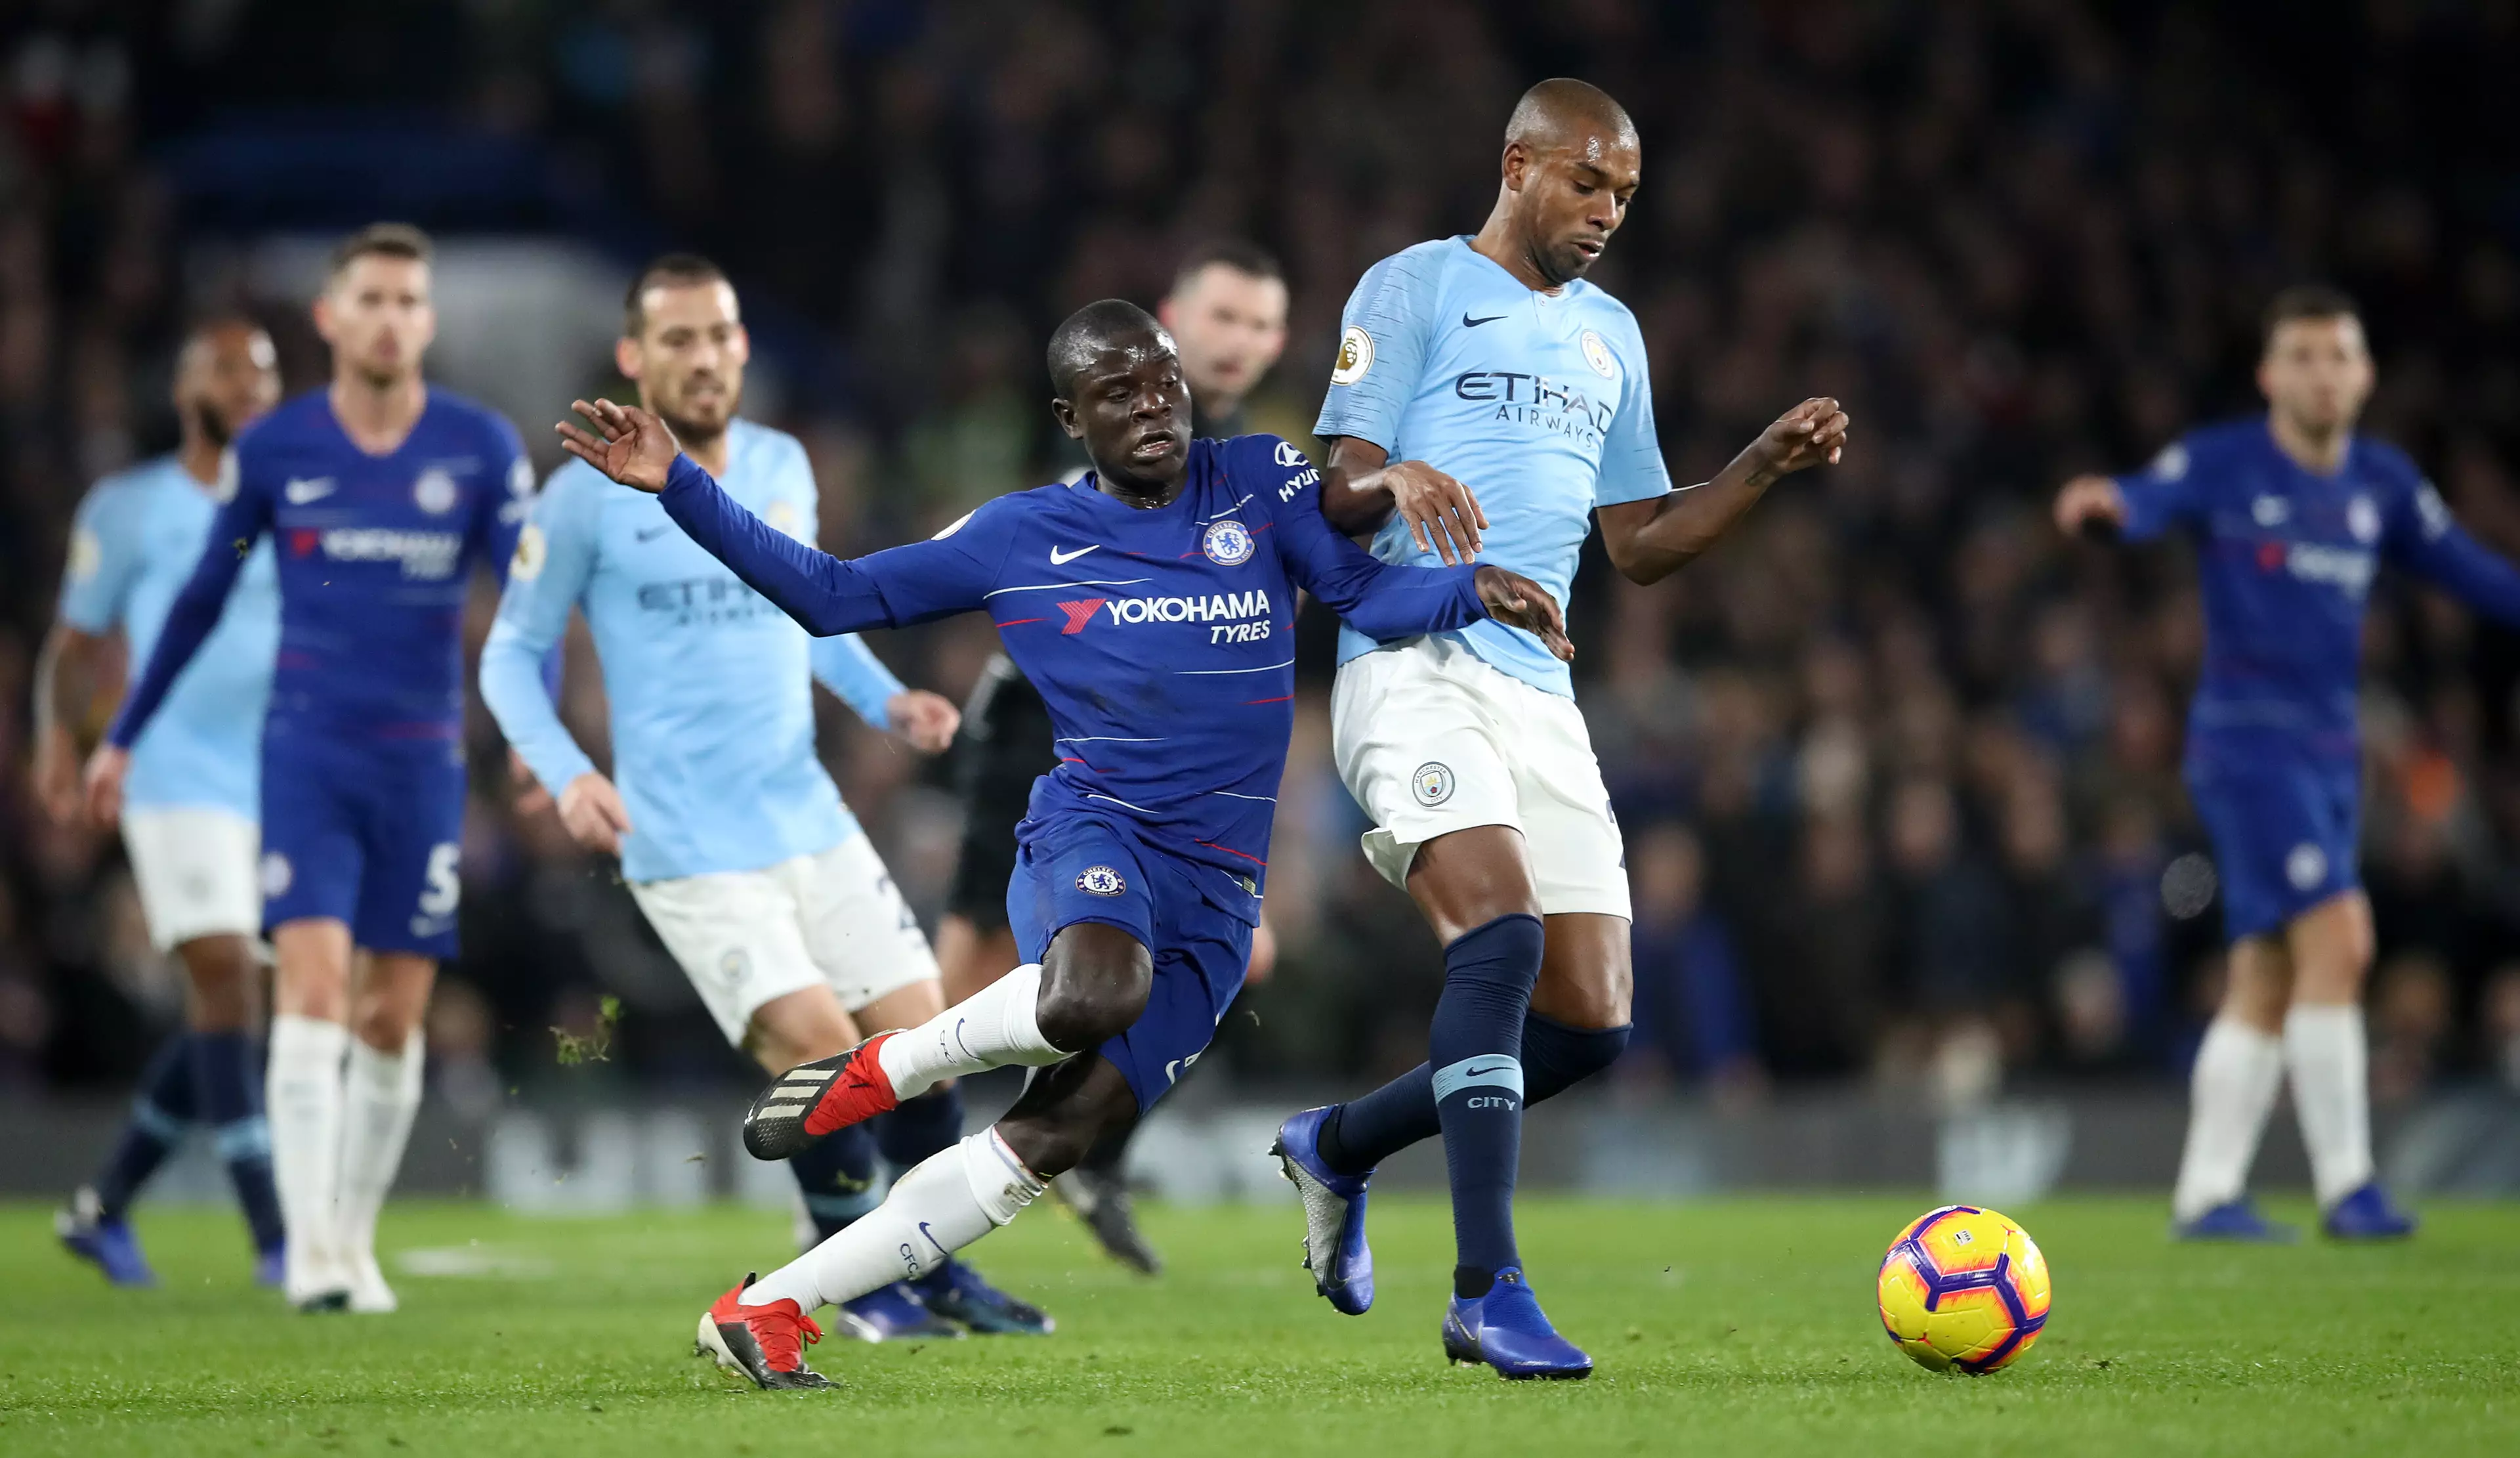 Fernandinho and N'Golo Kante could be prone to a foul or two in the middle of the park